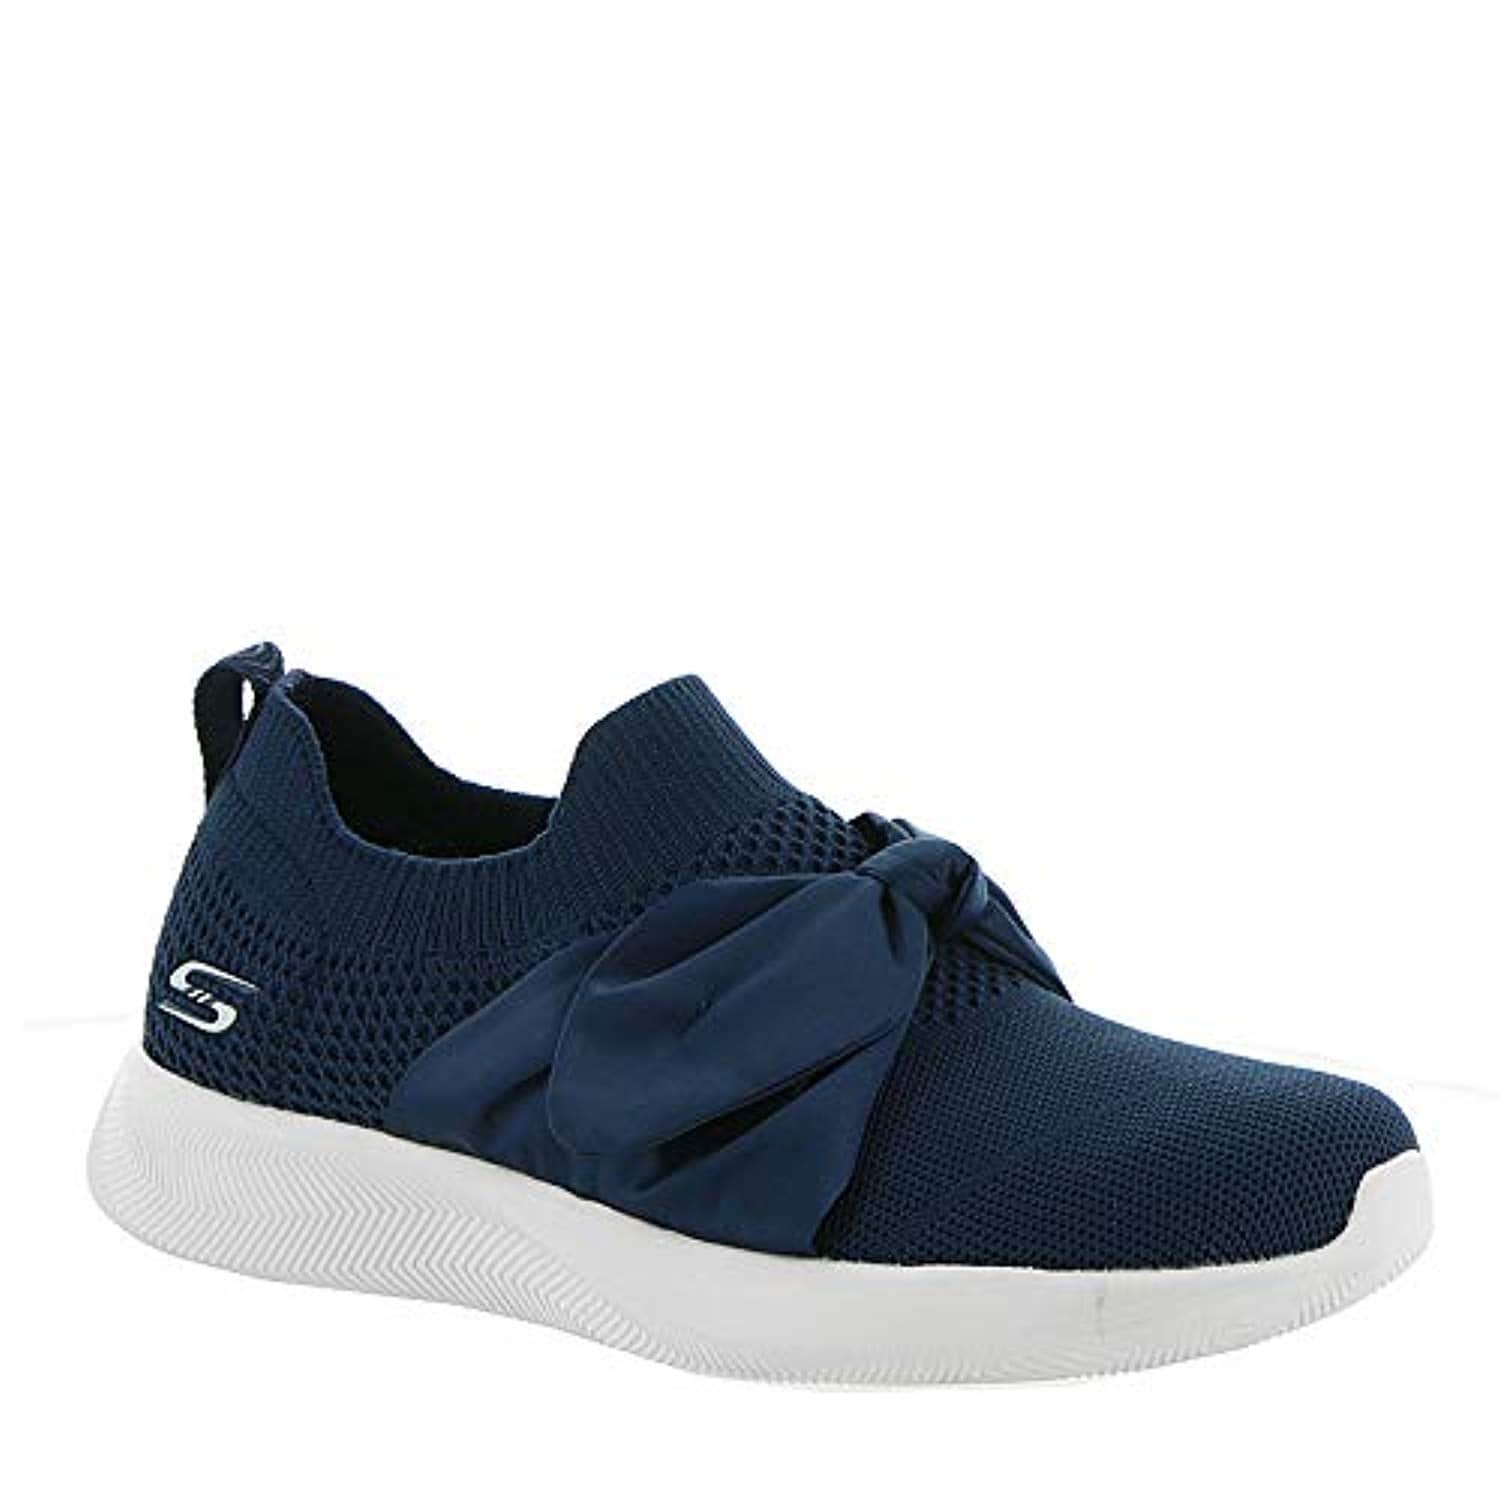 bobs squad 2 bow beauty sneaker